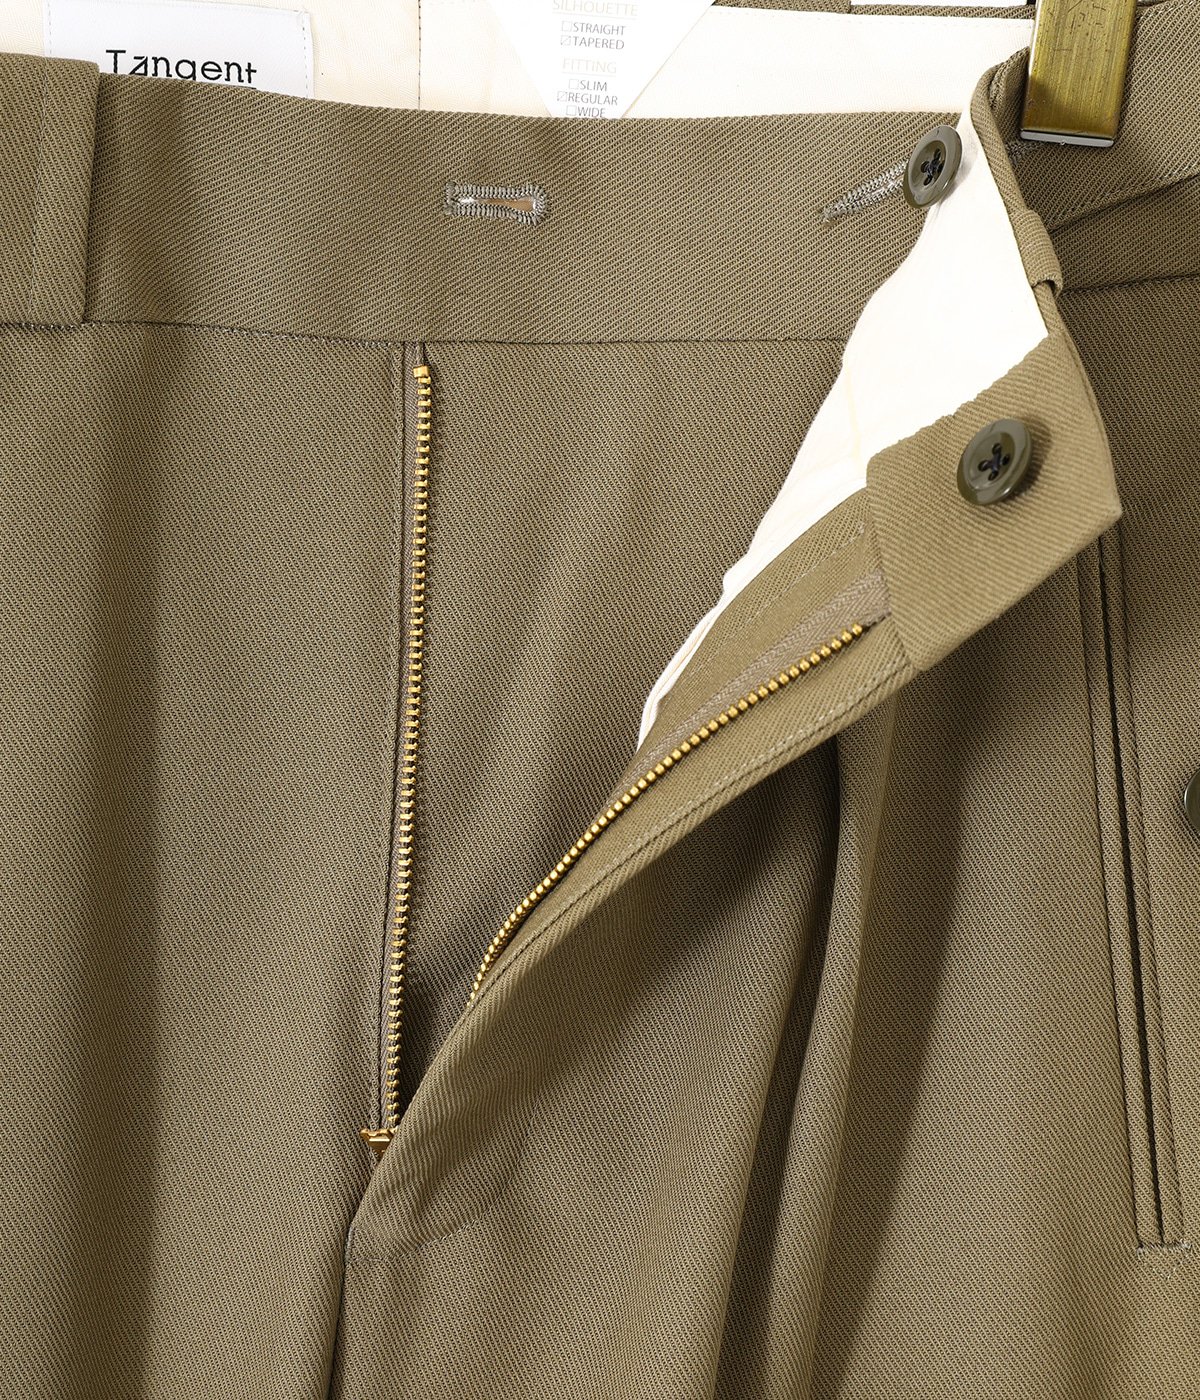 CHARLES -FRENCH ARMY ADJUSTER PANTS HARD TWIST TWILL | Tangent